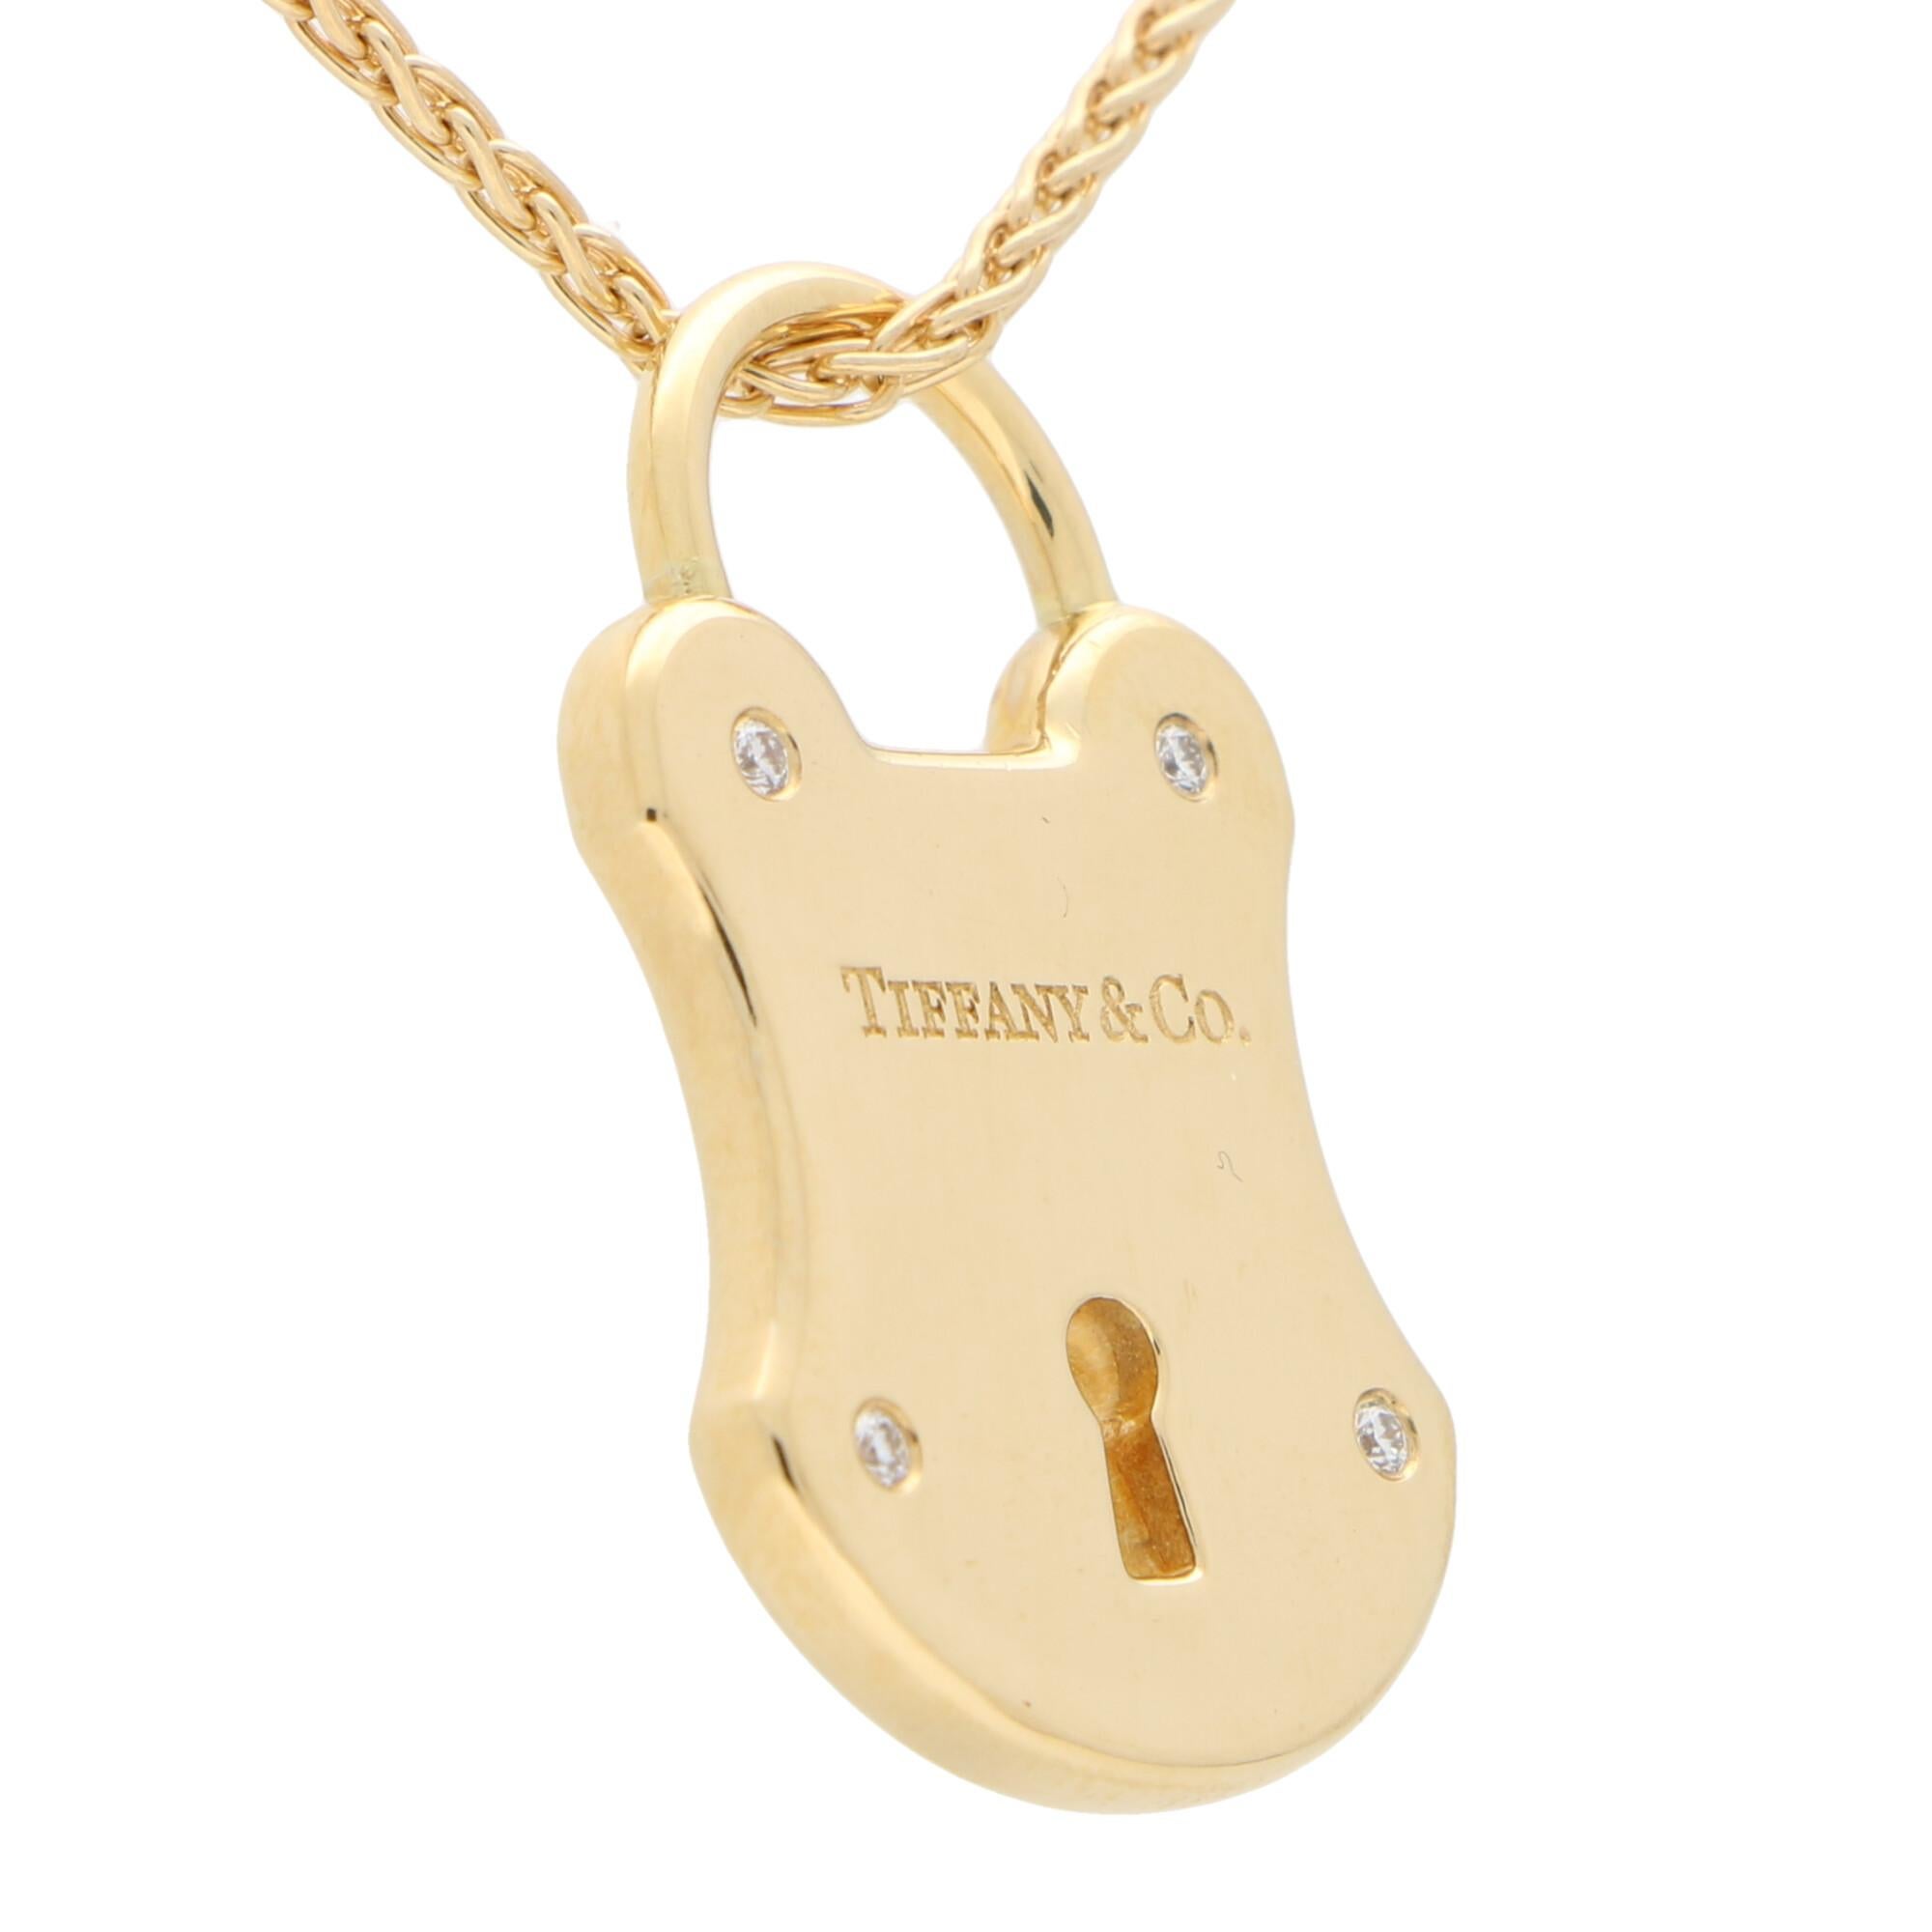 A beautiful signed Tiffany & Co. diamond lock pendant set in solid 18k yellow gold.

The pendant depicts a large lock motif and hangs elegantly from the hatch. To each corner of the pendant are rub-over set round brilliant cut diamonds that depict